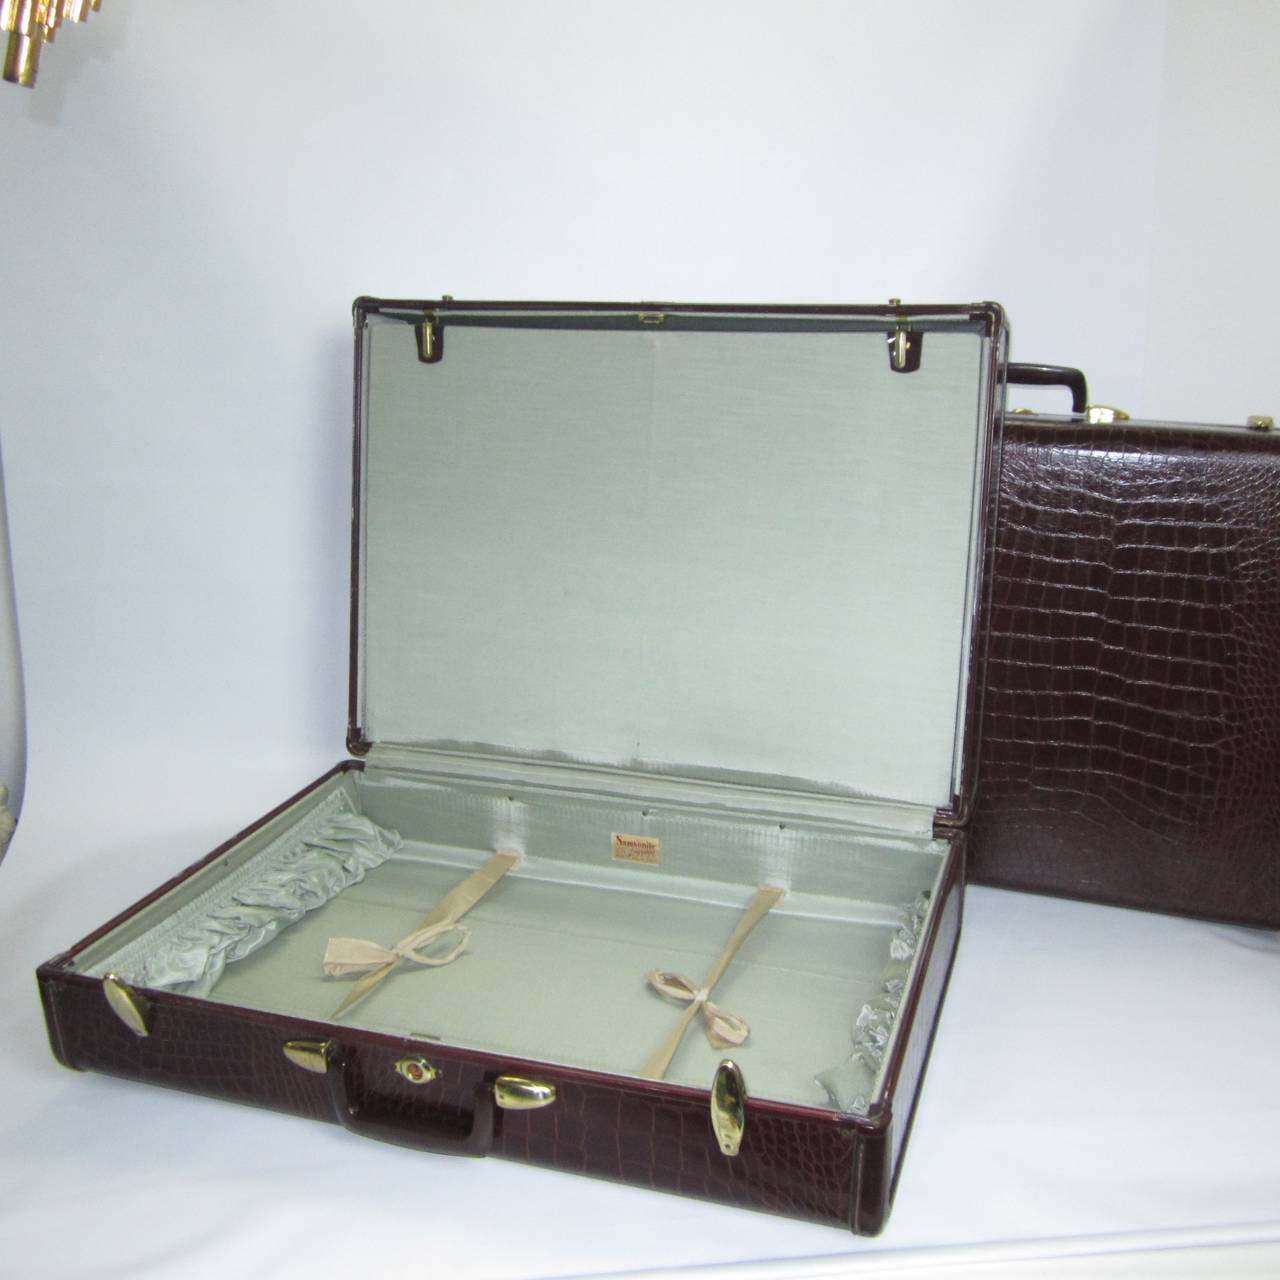 Pair of Crocodile-Embossed Leather Suitcases For Sale at 1stdibs